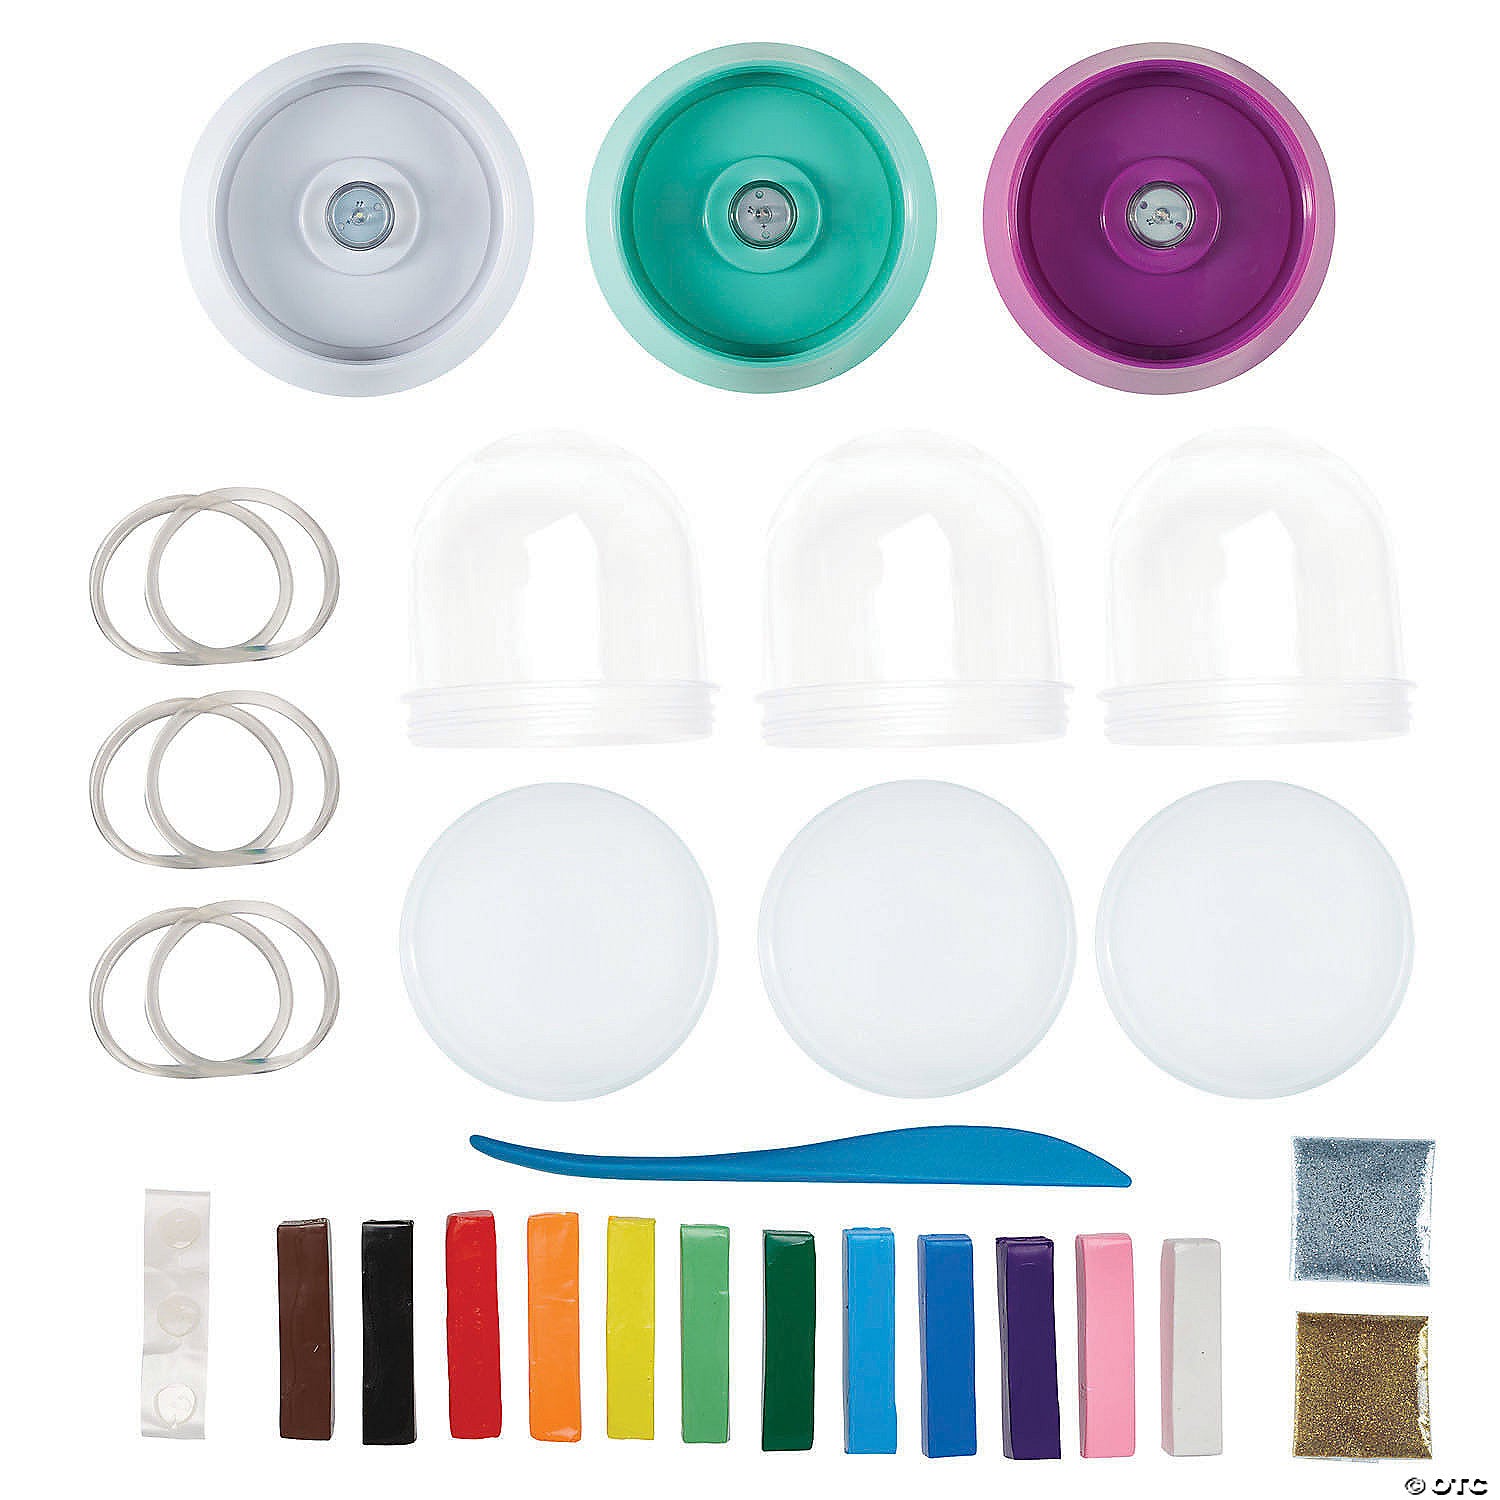 A look at what's included inside the MYO Light Up Snow Globes kit.